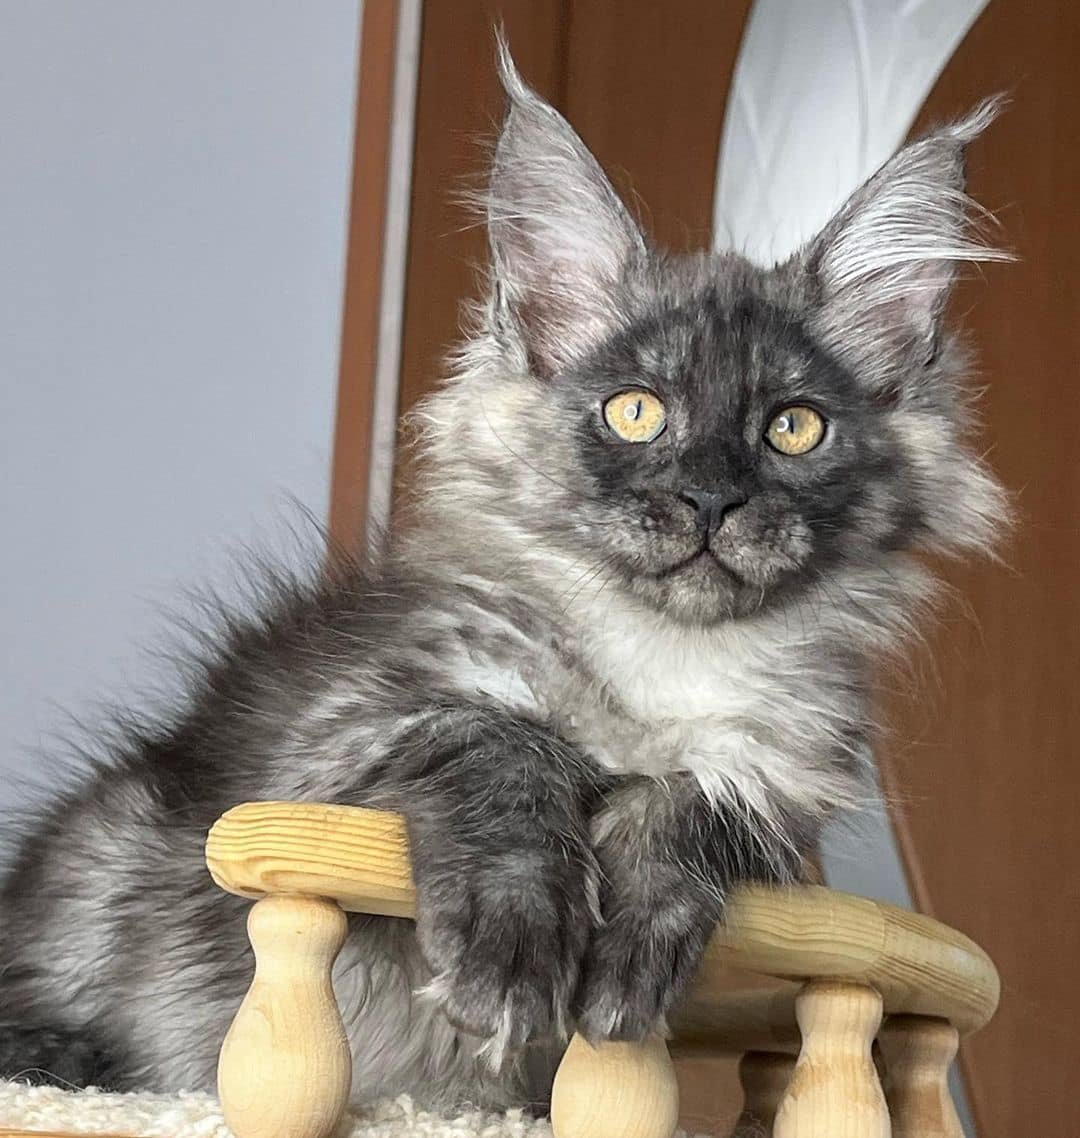 Giant Maine Coon Cats for Sale, Black Smoke Silver